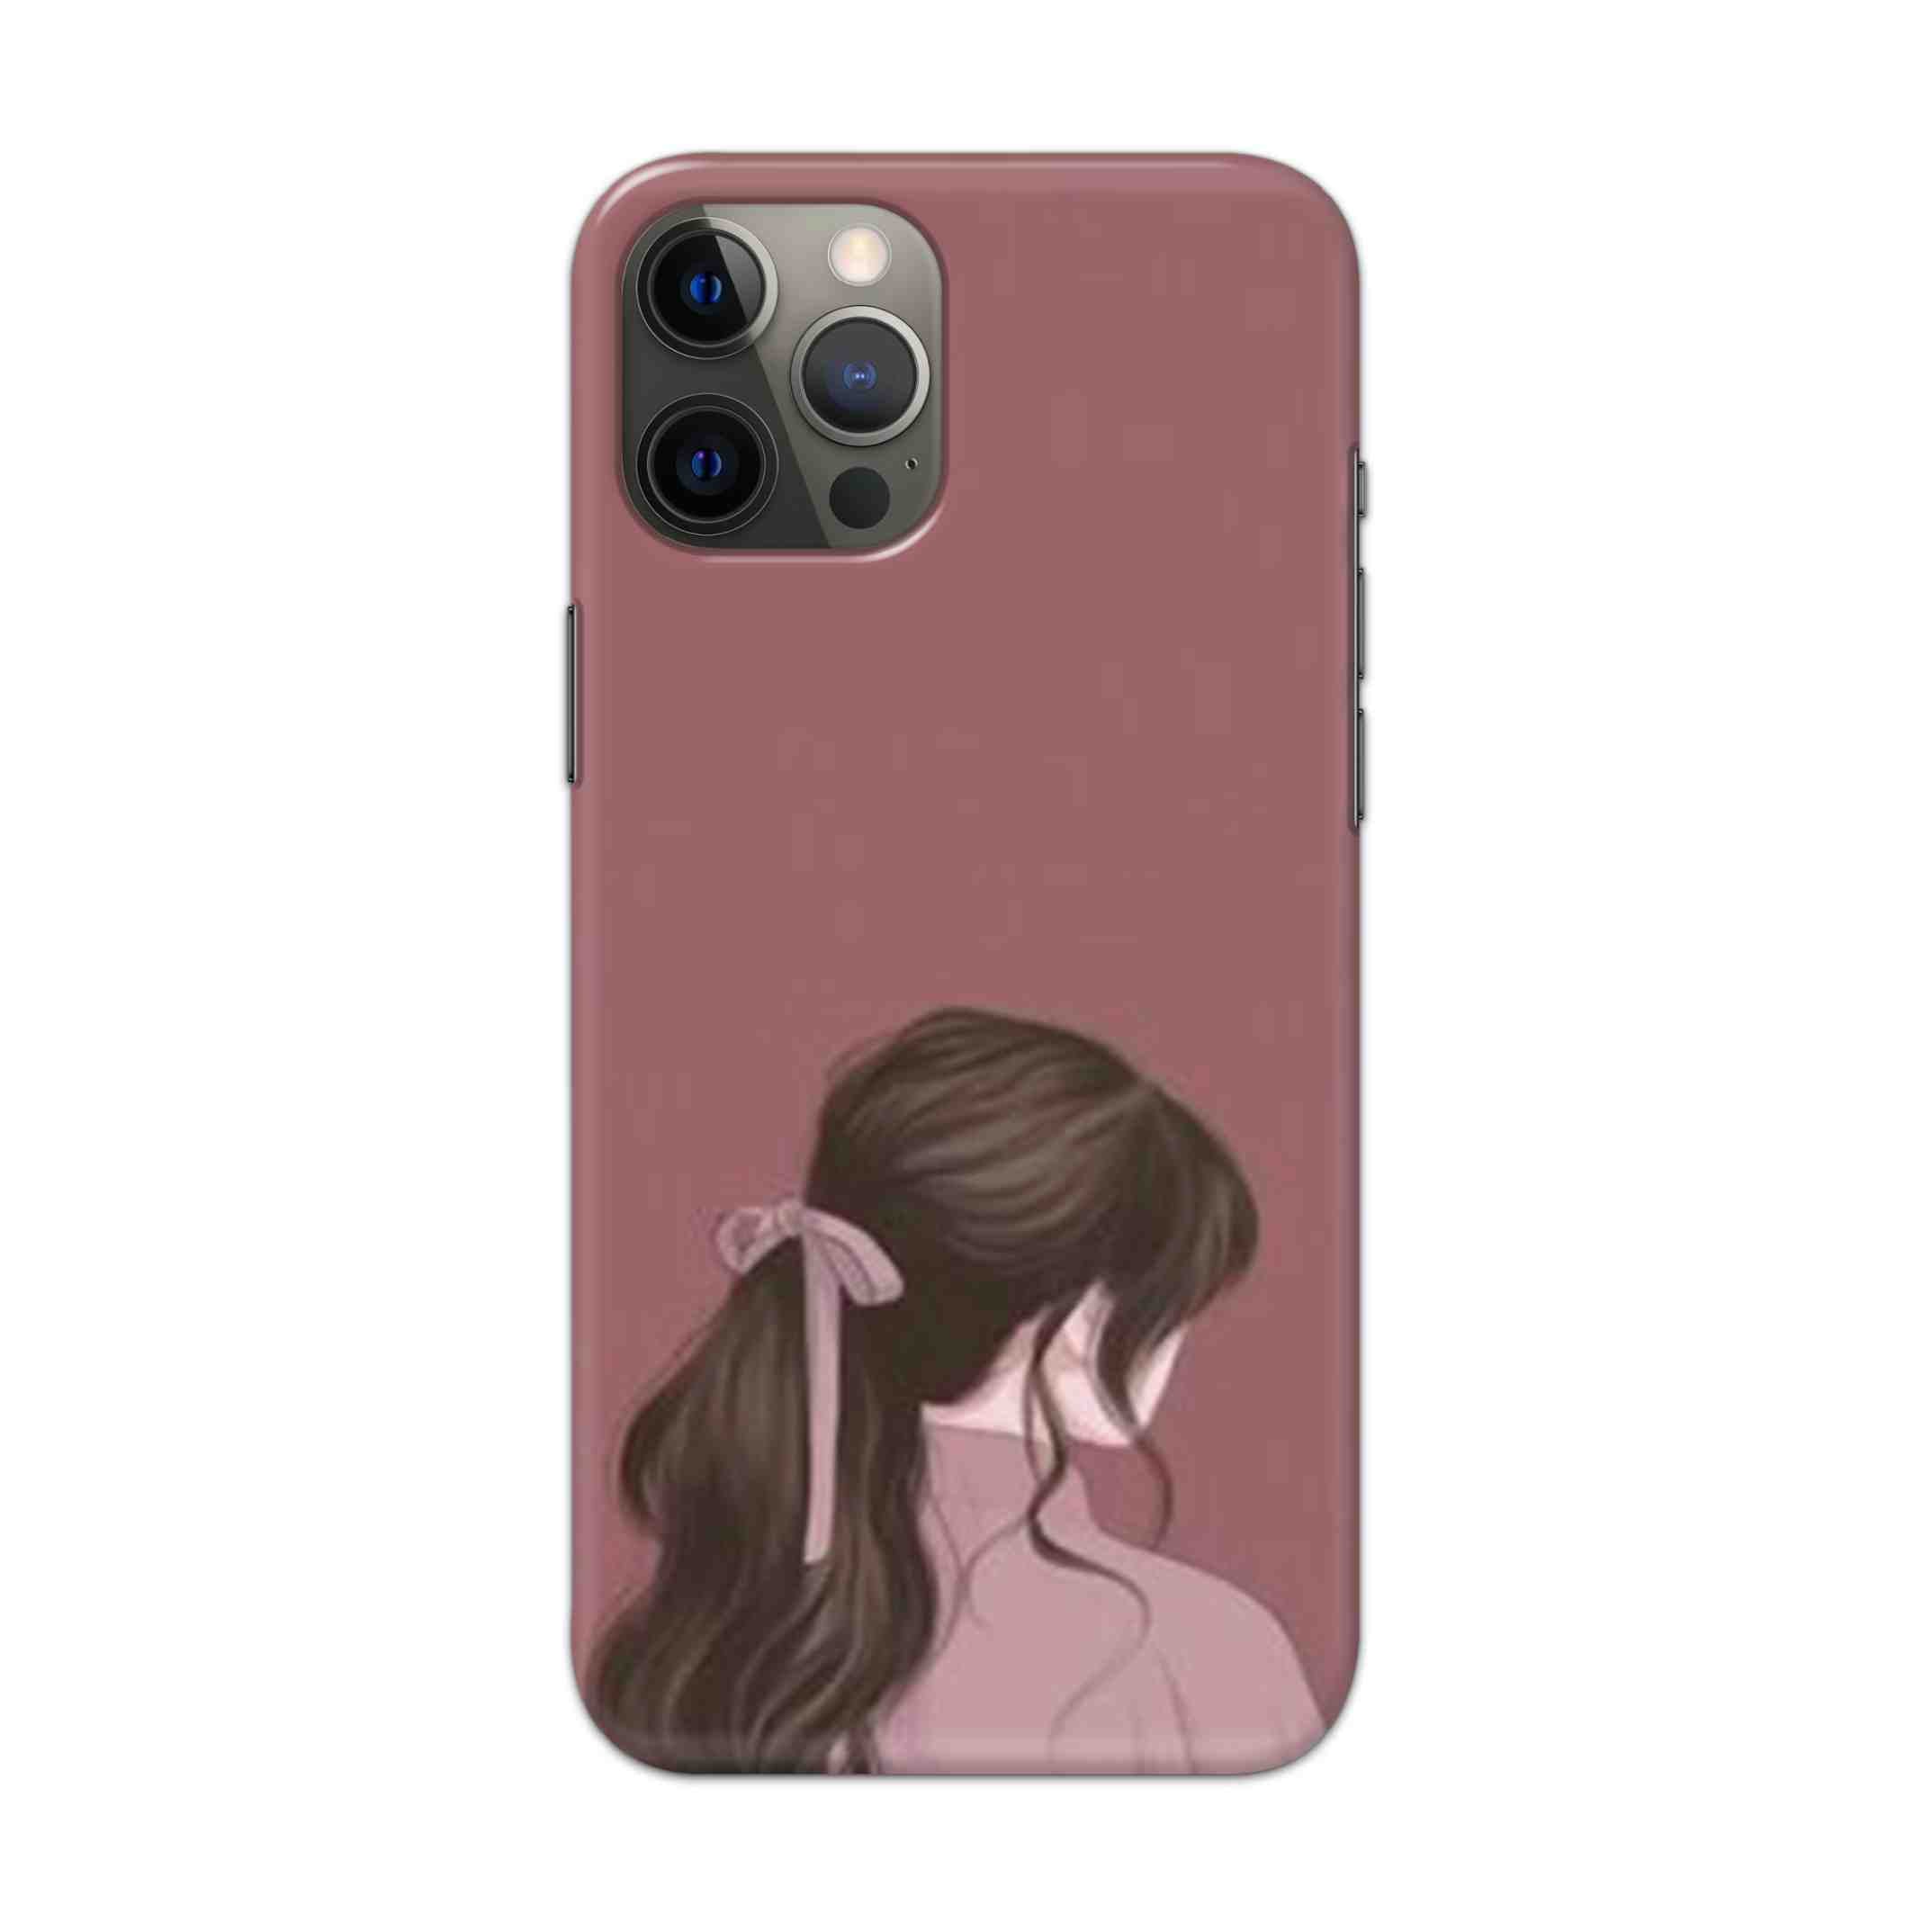 Buy Pink Girl Hard Back Mobile Phone Case Cover For Apple iPhone 12 pro Online